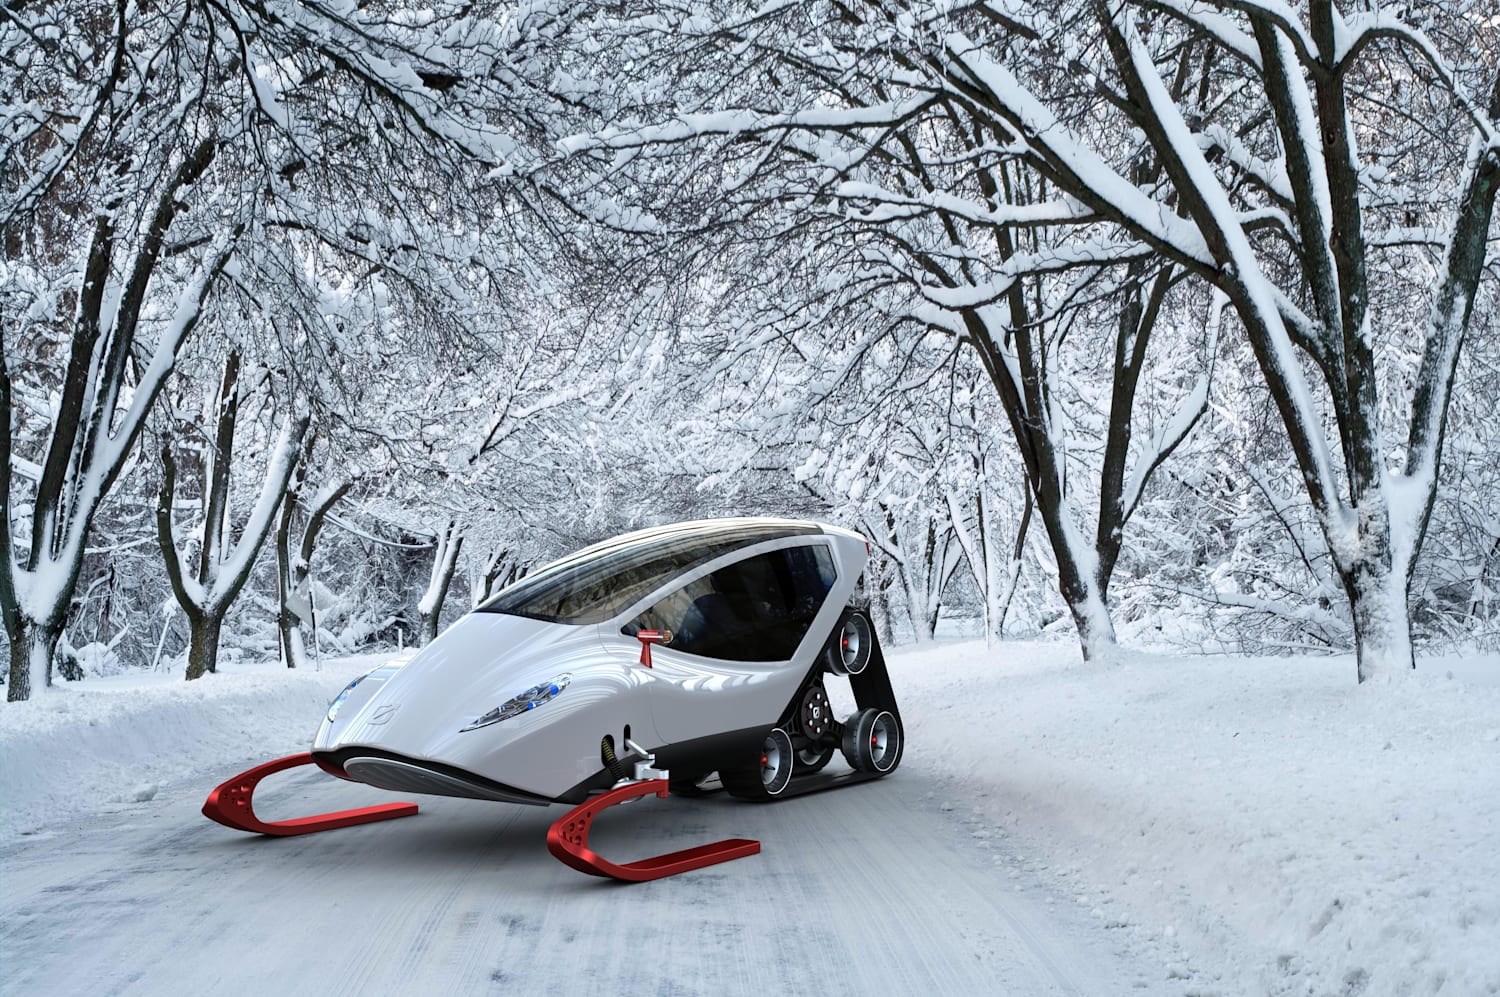 Best snow vehicles 9 machines that make traveling easy